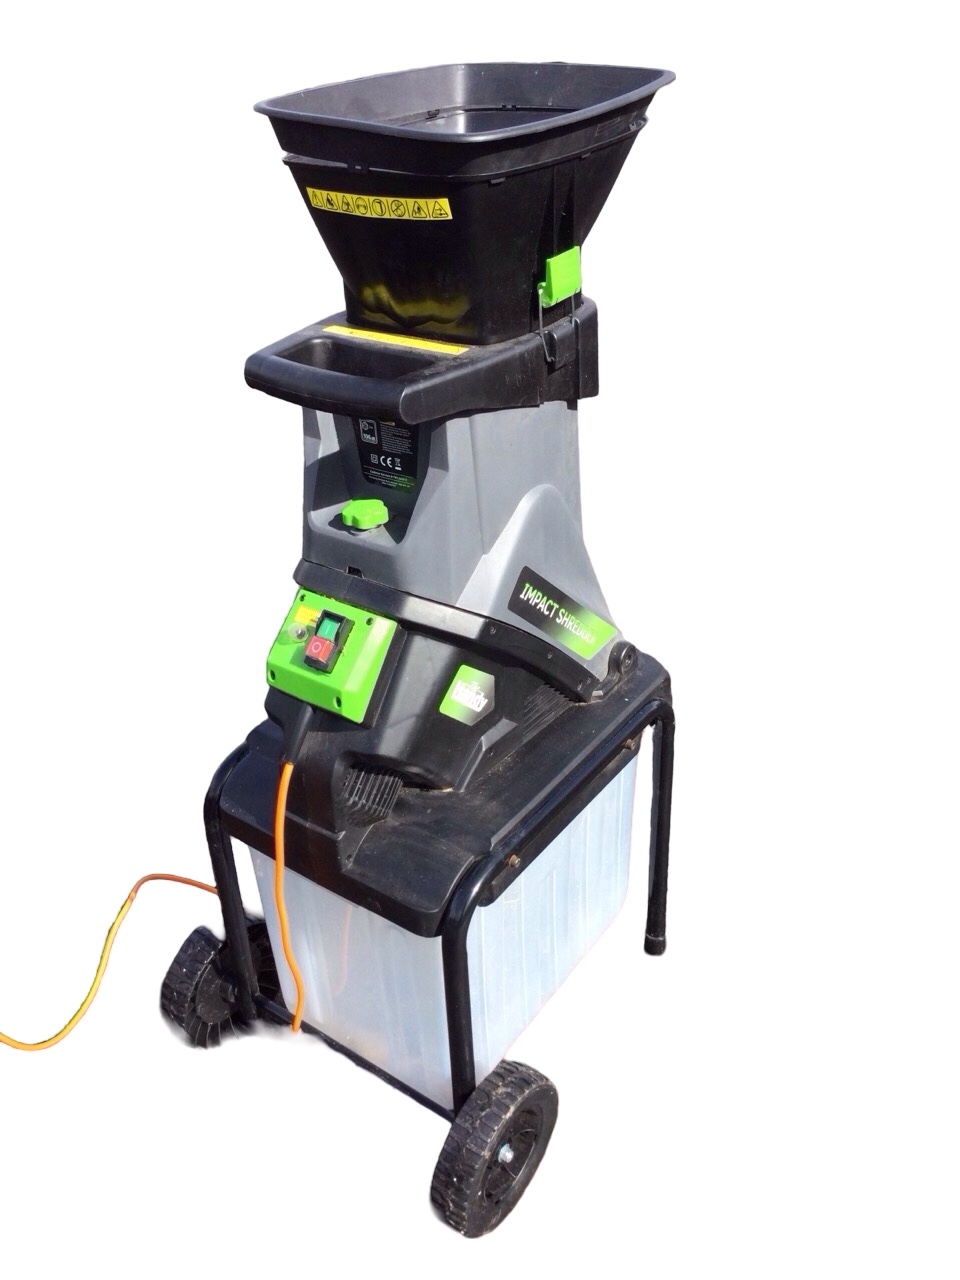 A Handy electric garden shredder, the 2500w machine on trolley stand, complete with instruction